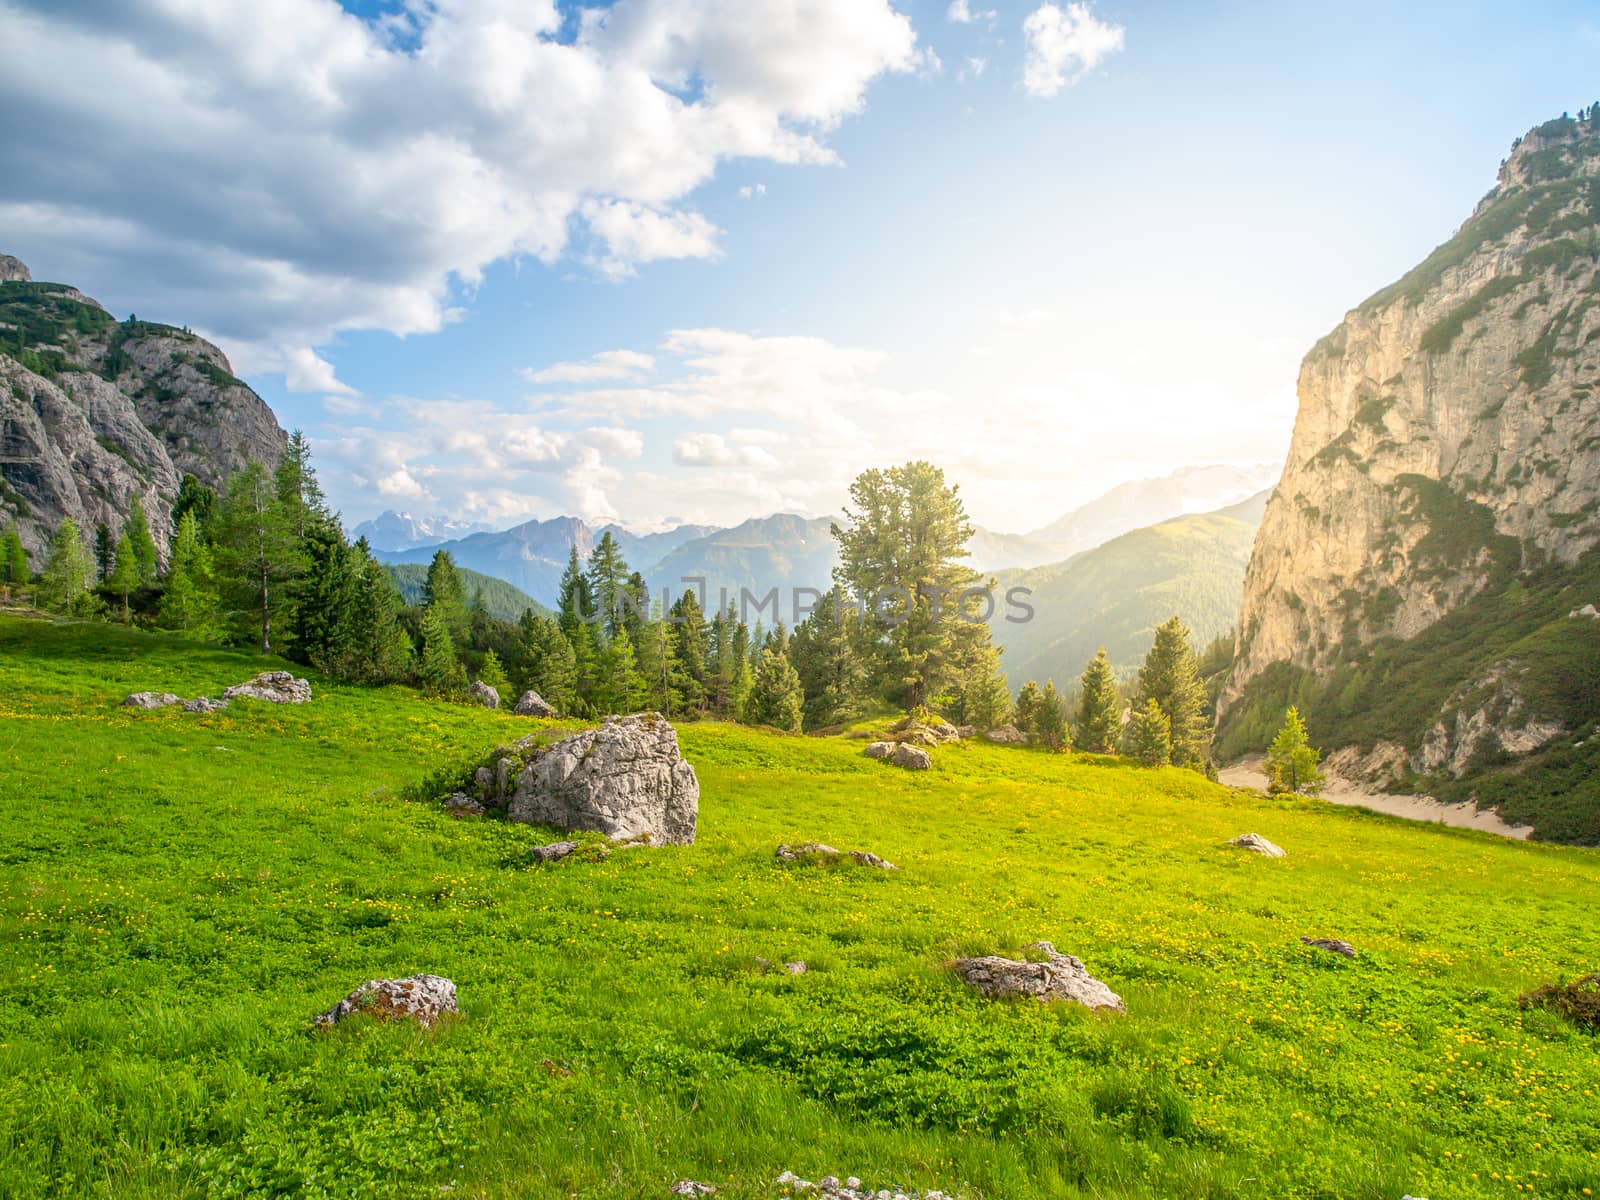 Landscape of Dolomites near Passo Falzarego. With green meadows, blue sky, white clouds and rocky mountains.